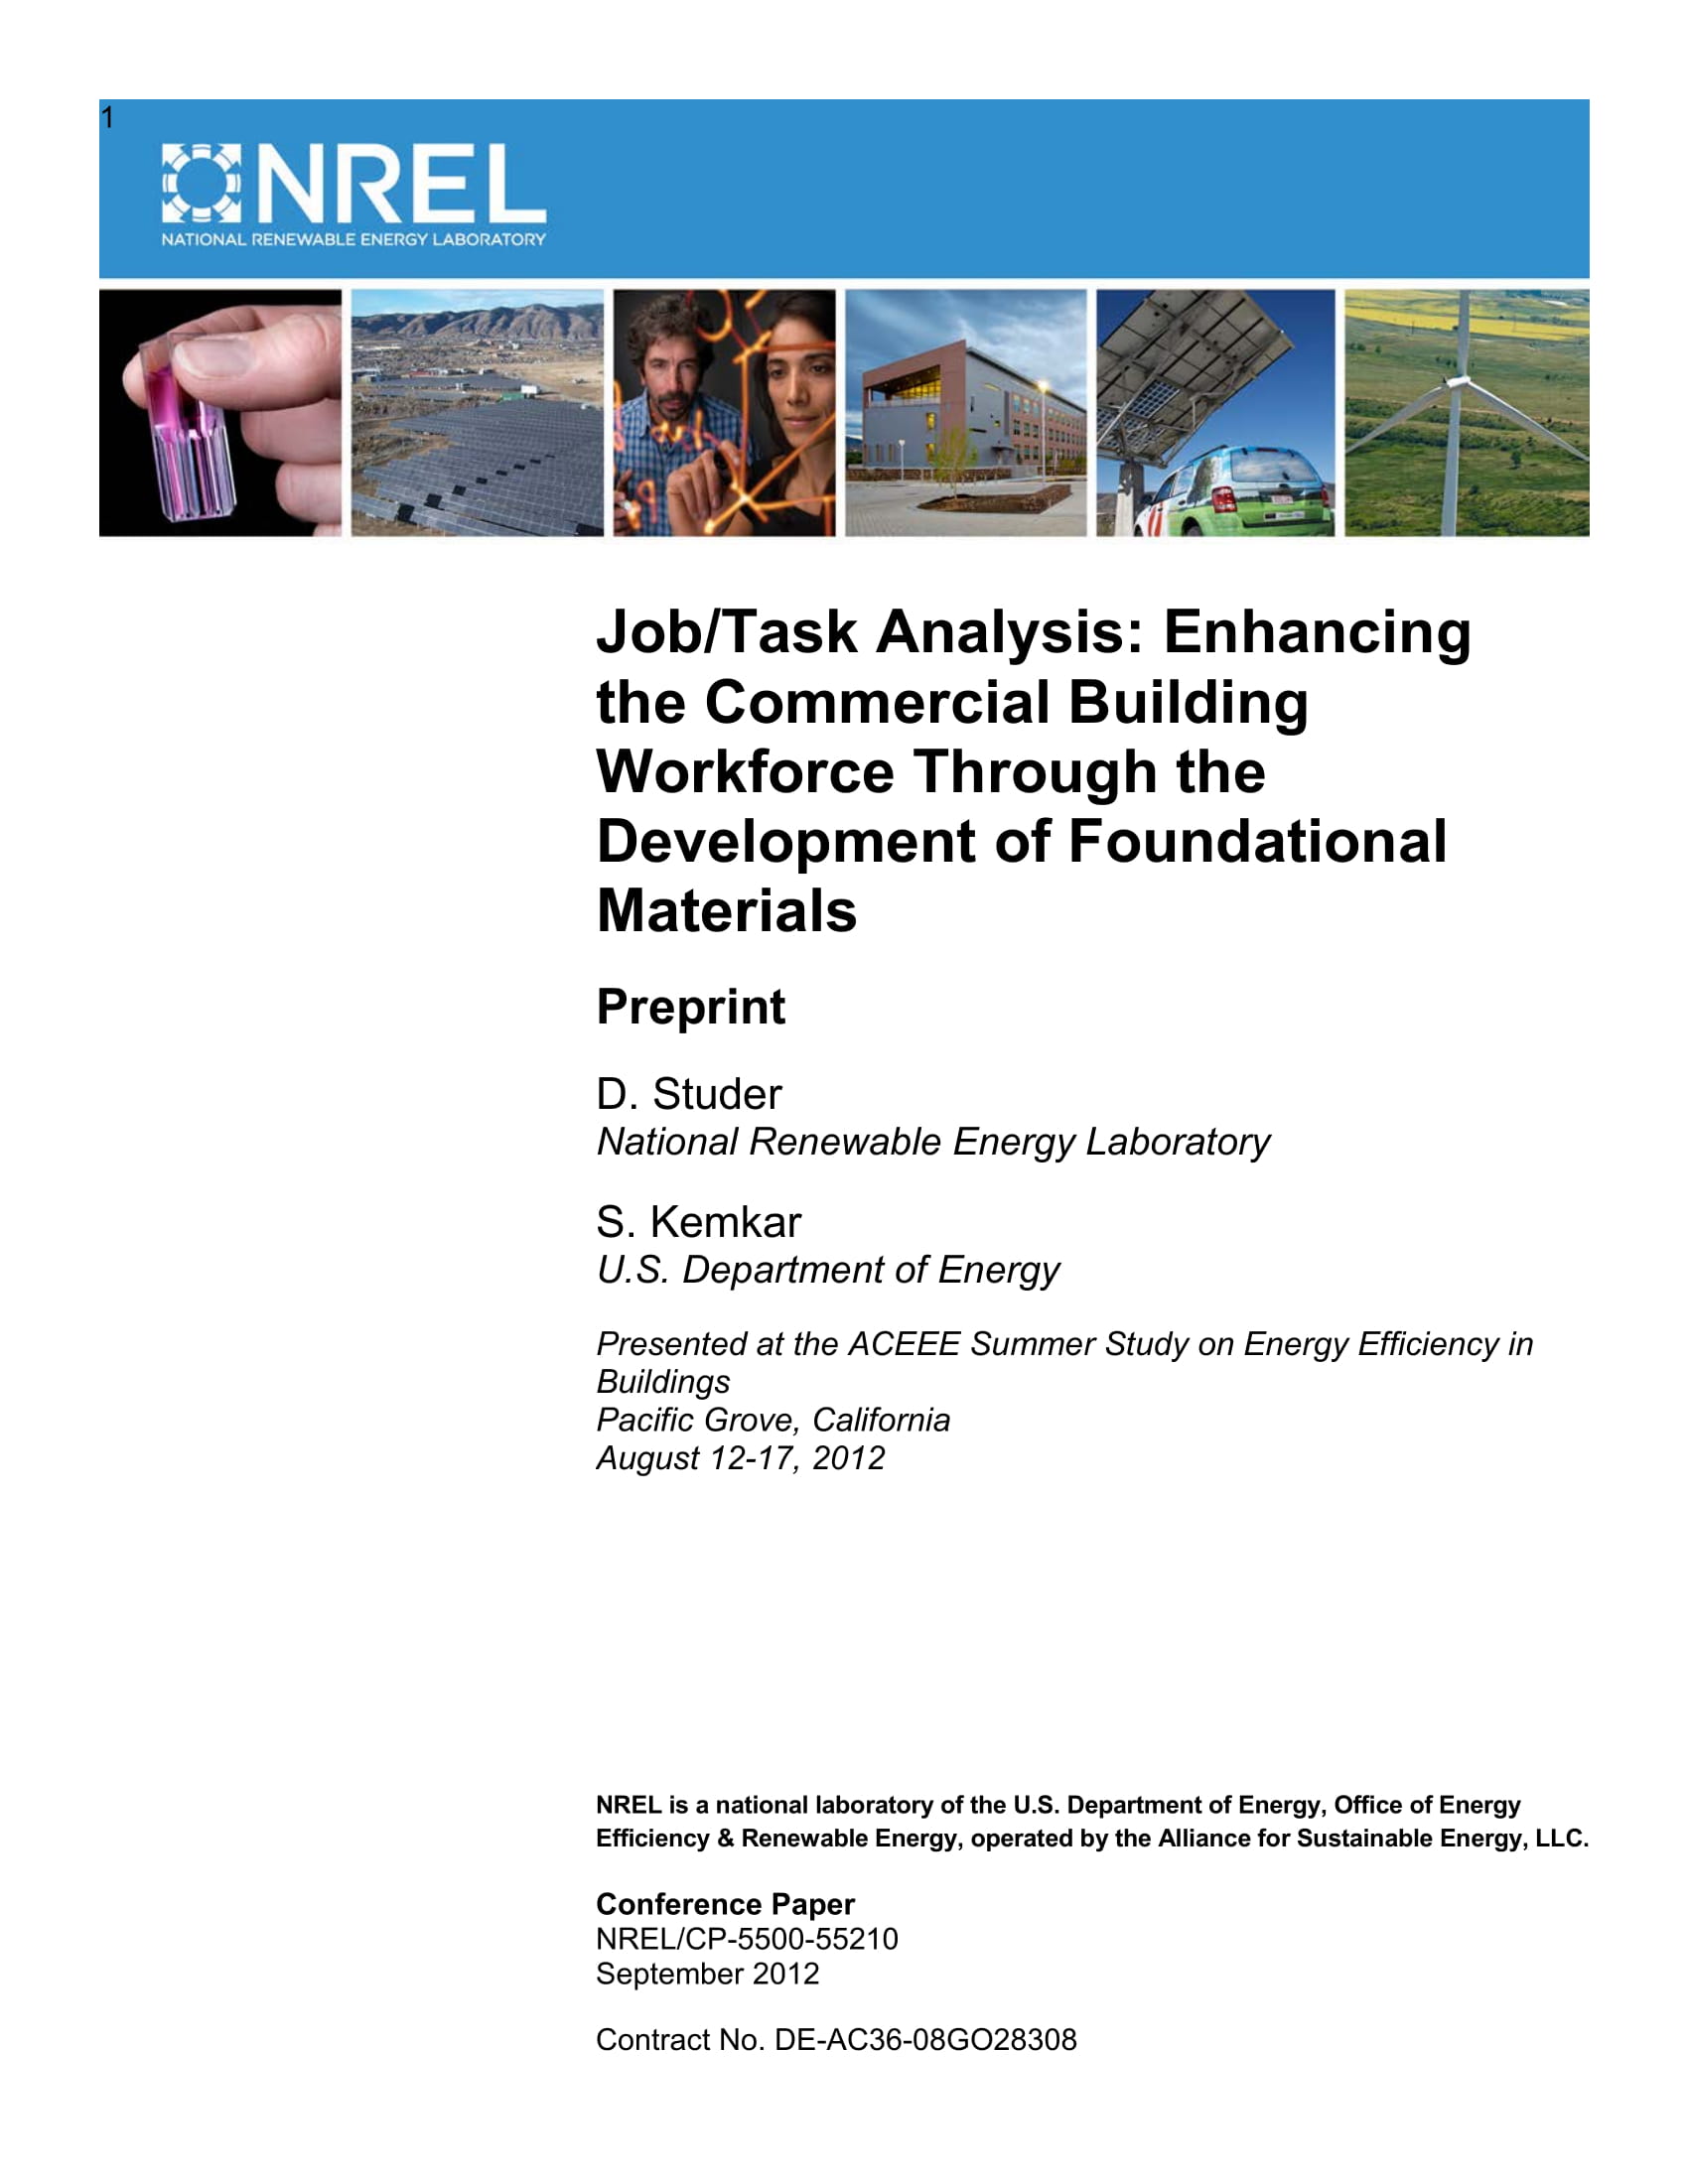 job or task analysis enhancing the commercial building workforce through development of foundational materials example 01